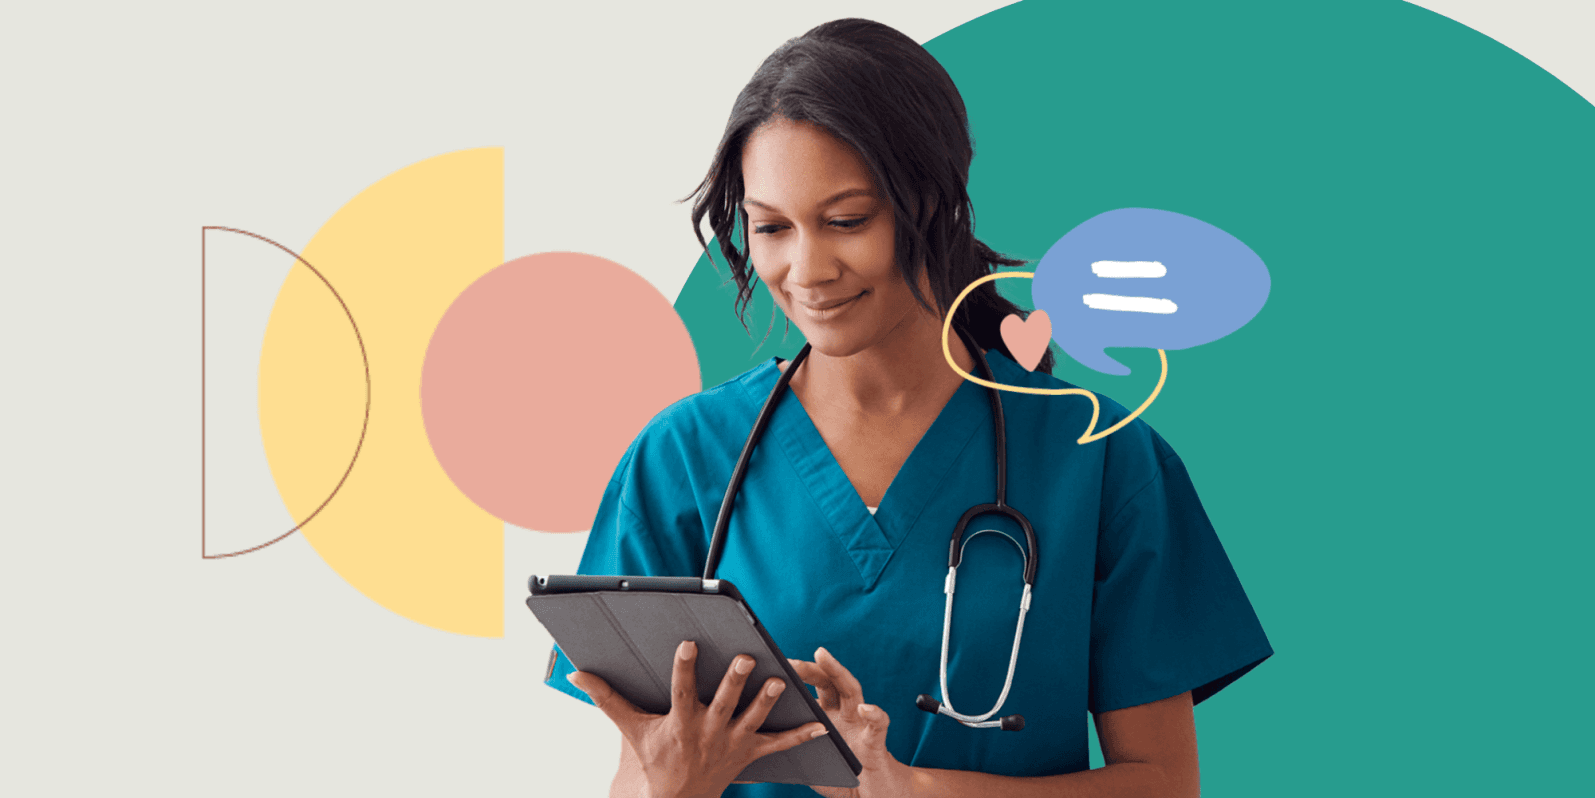 A provider uses a tablet to manage healthcare